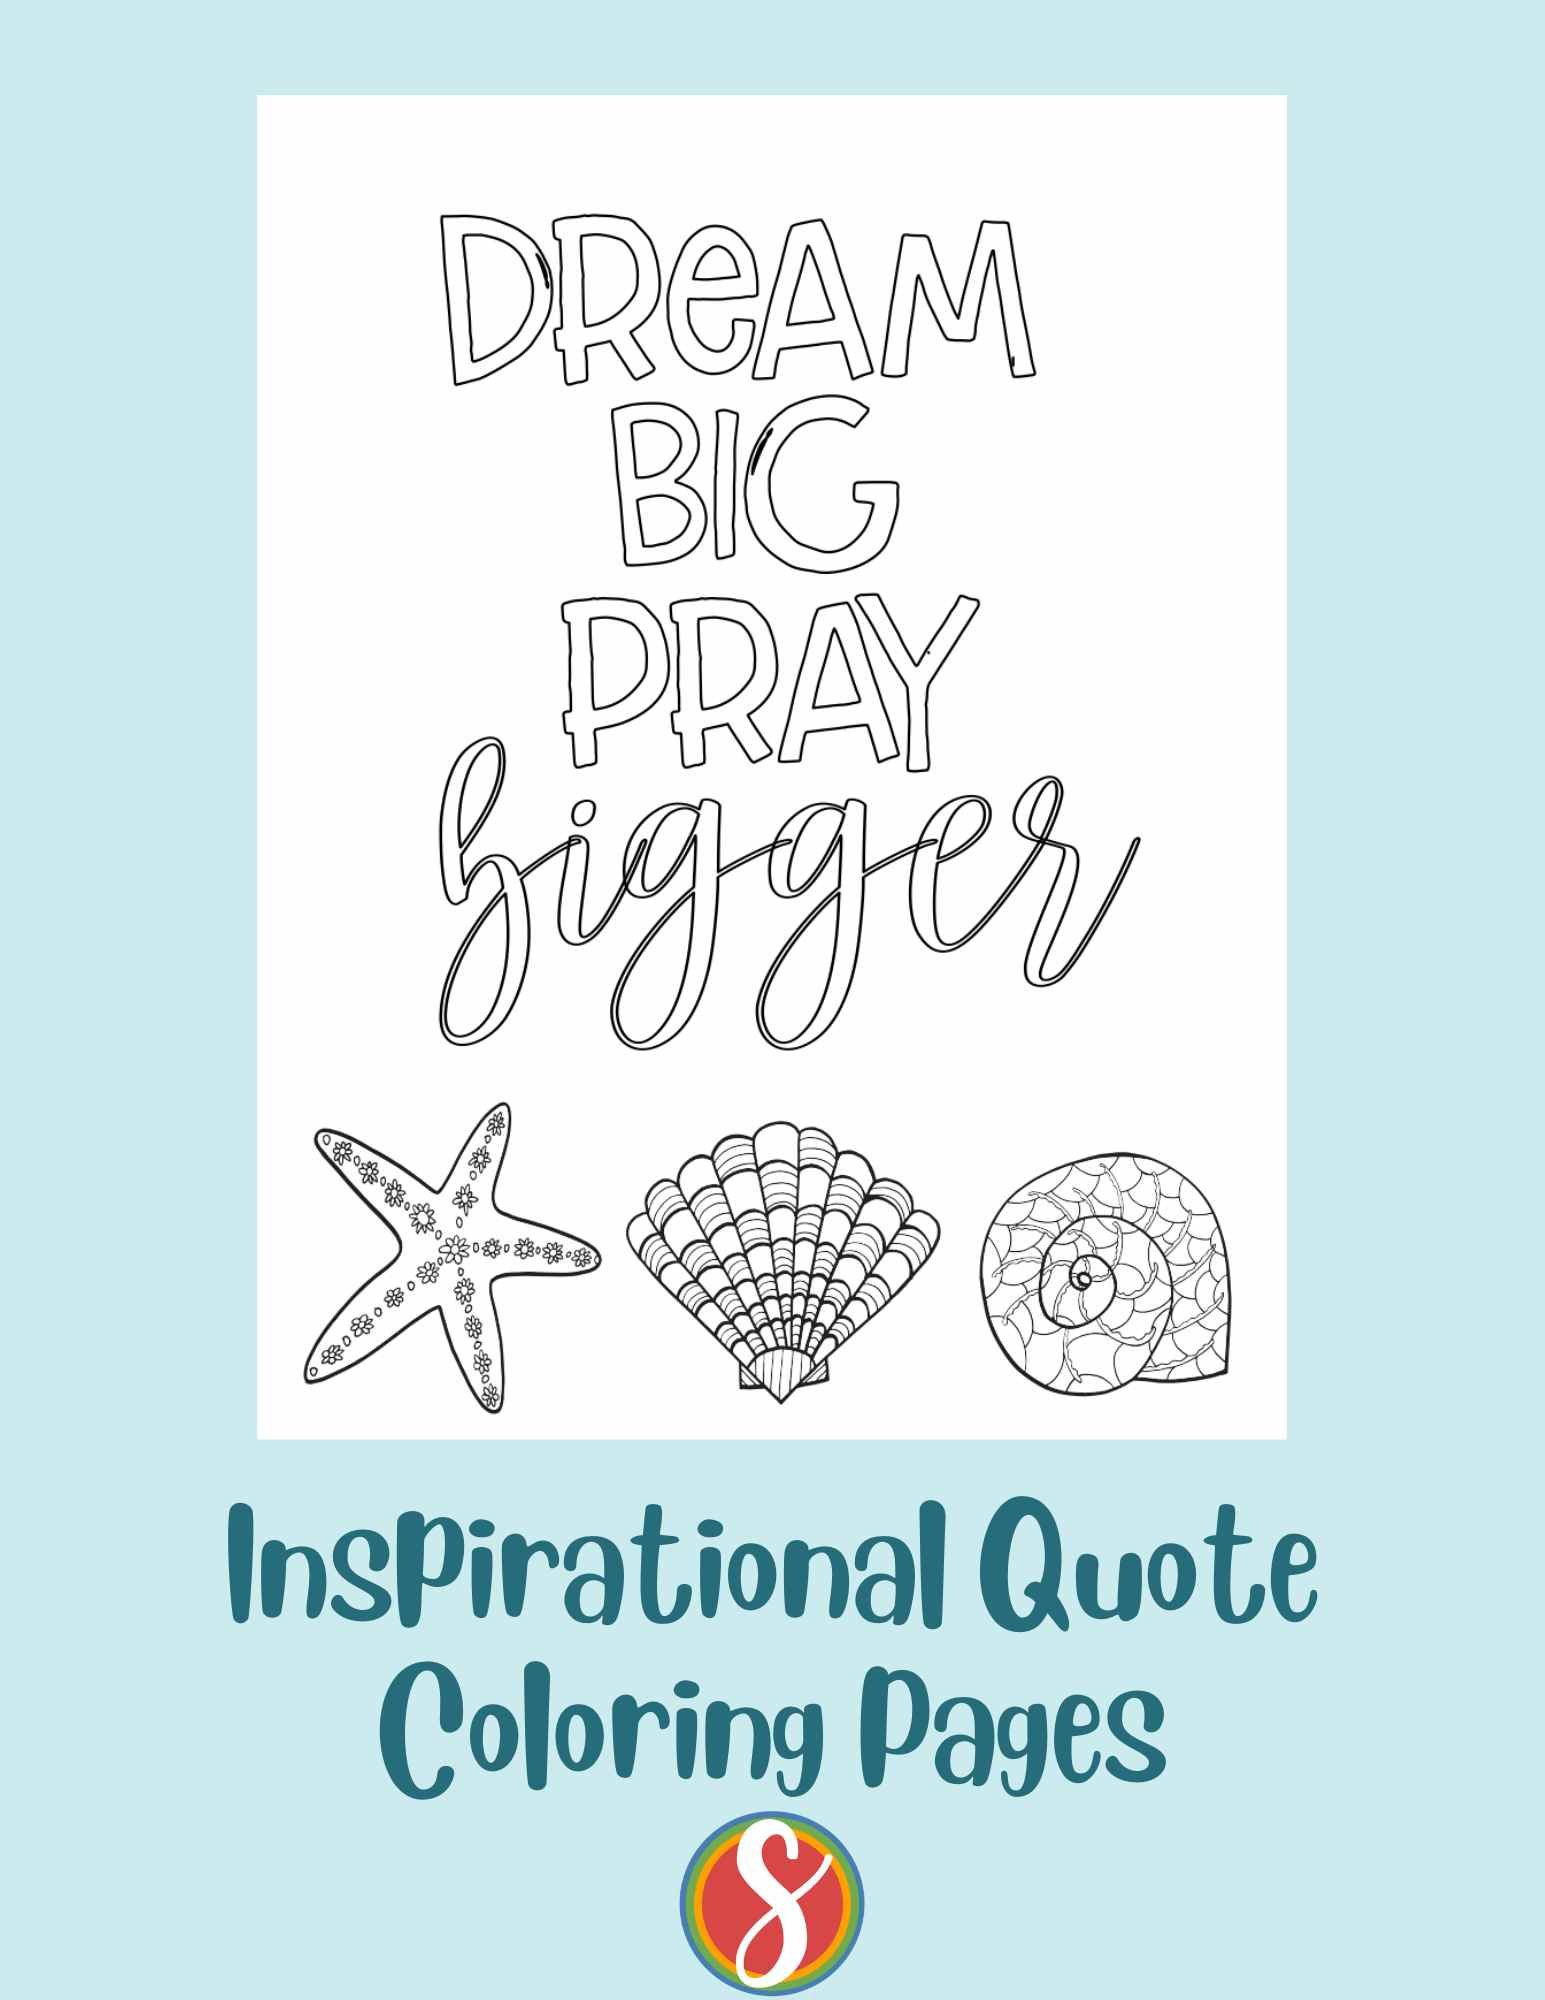 three shells full of doodles to color at the bottom, colorable words above "Dream big, pray bigger"